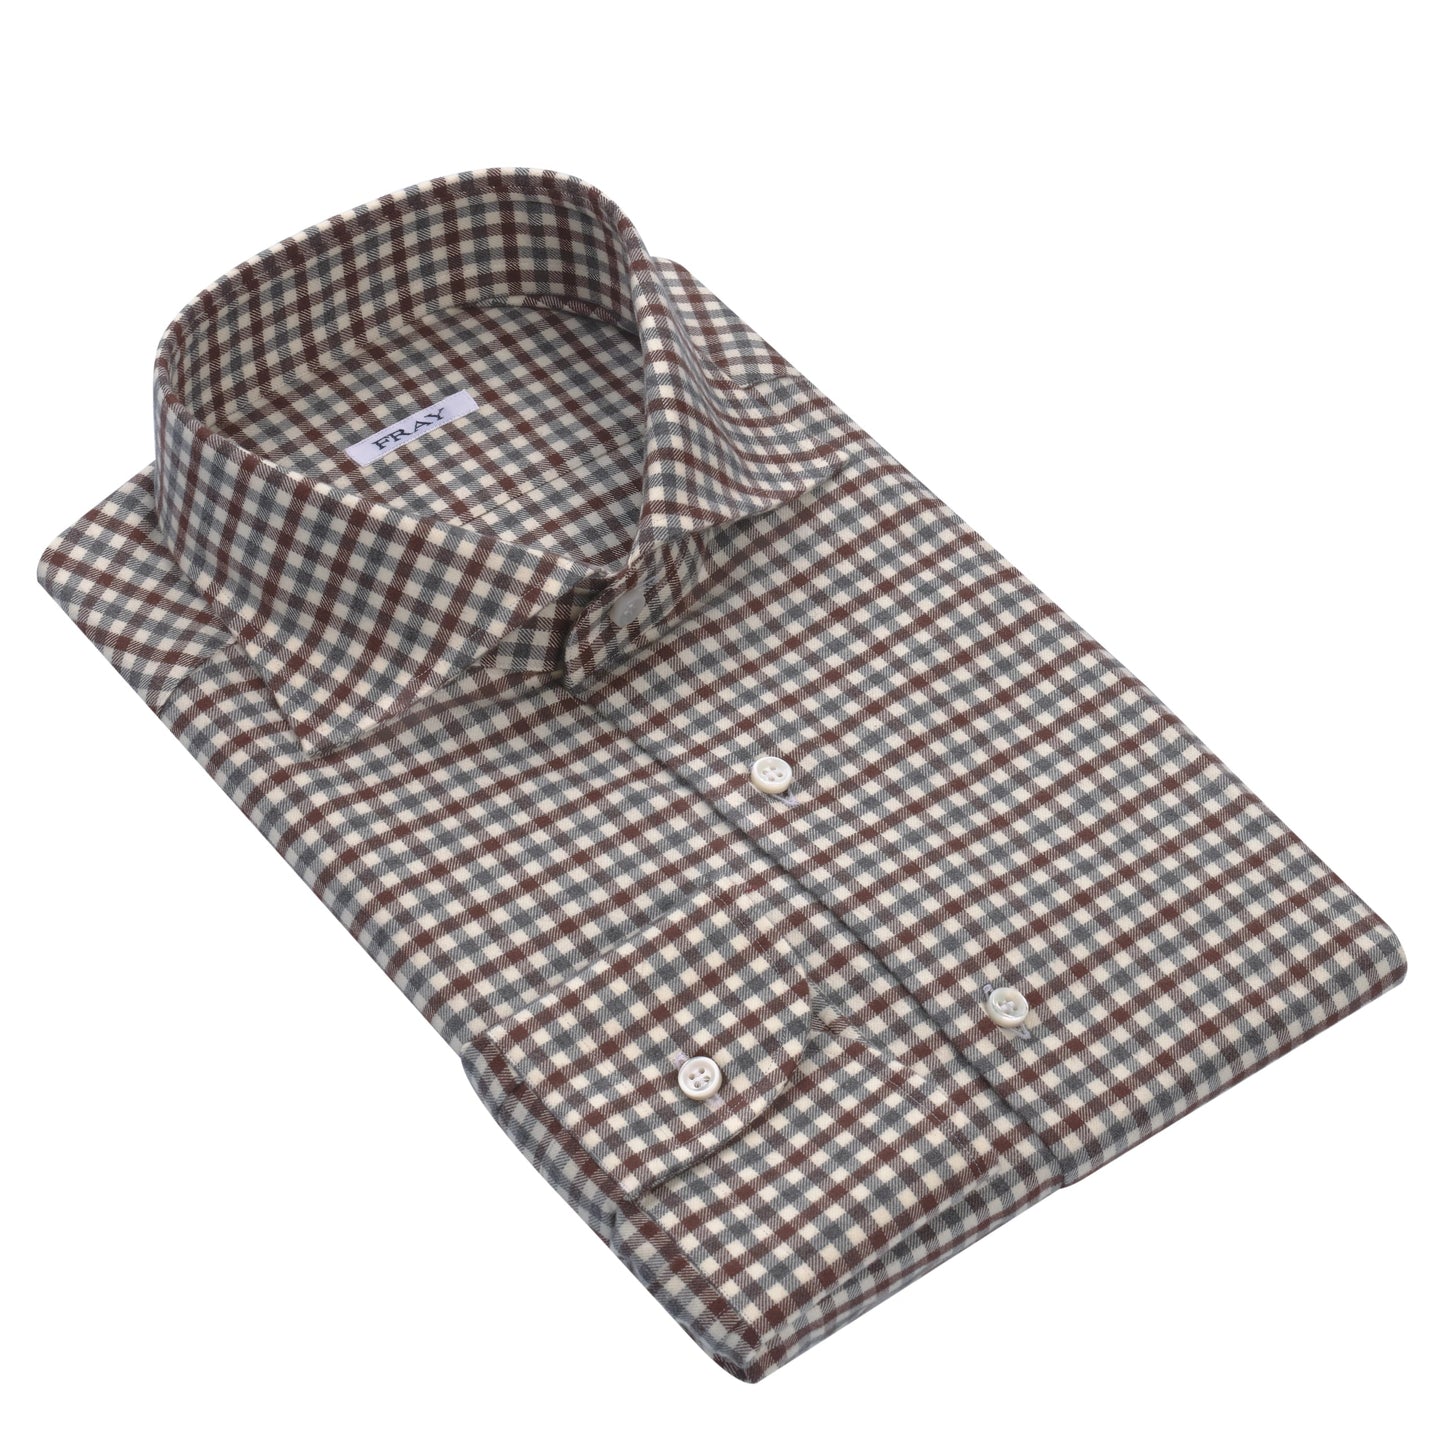 Fray Gingham - Check Cotton Shirt in Grey and Off White - SARTALE